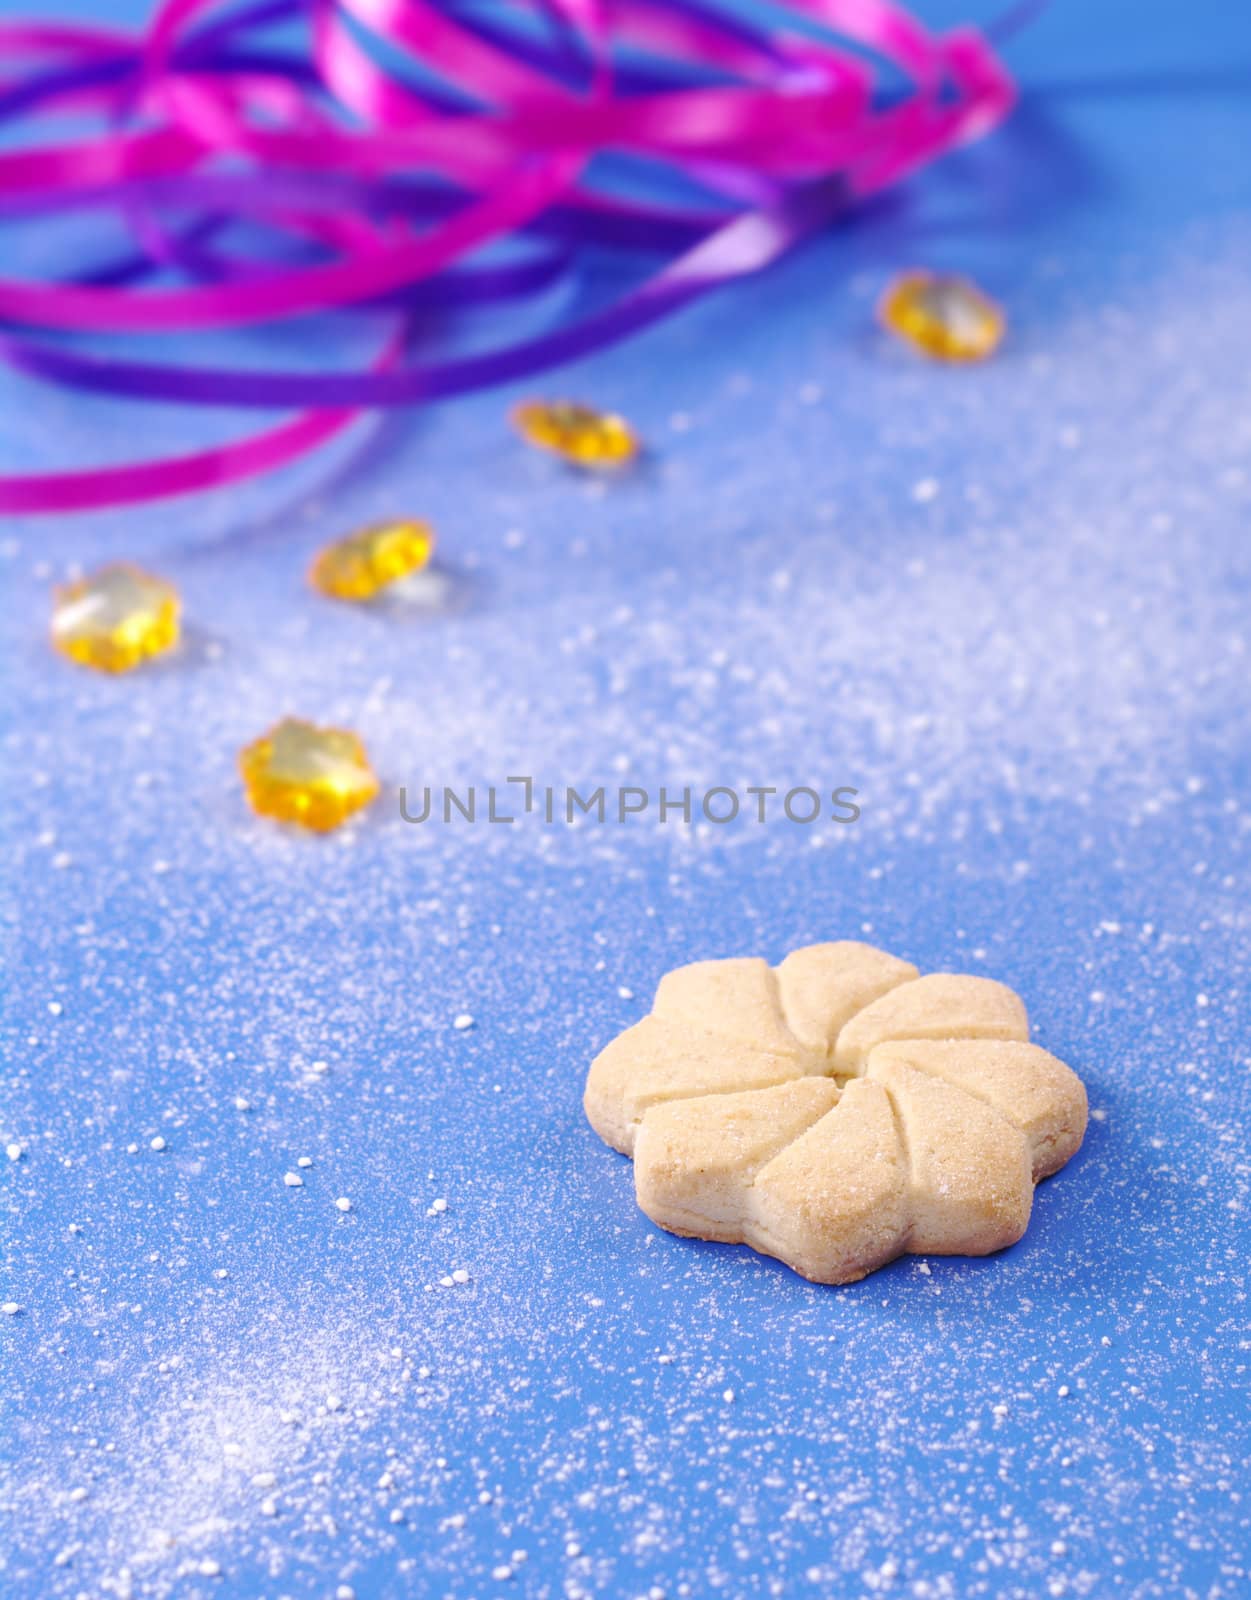 Star-shaped cookie on blue with powder sugar, yellow stones, and ribbons (Selective Focus)  